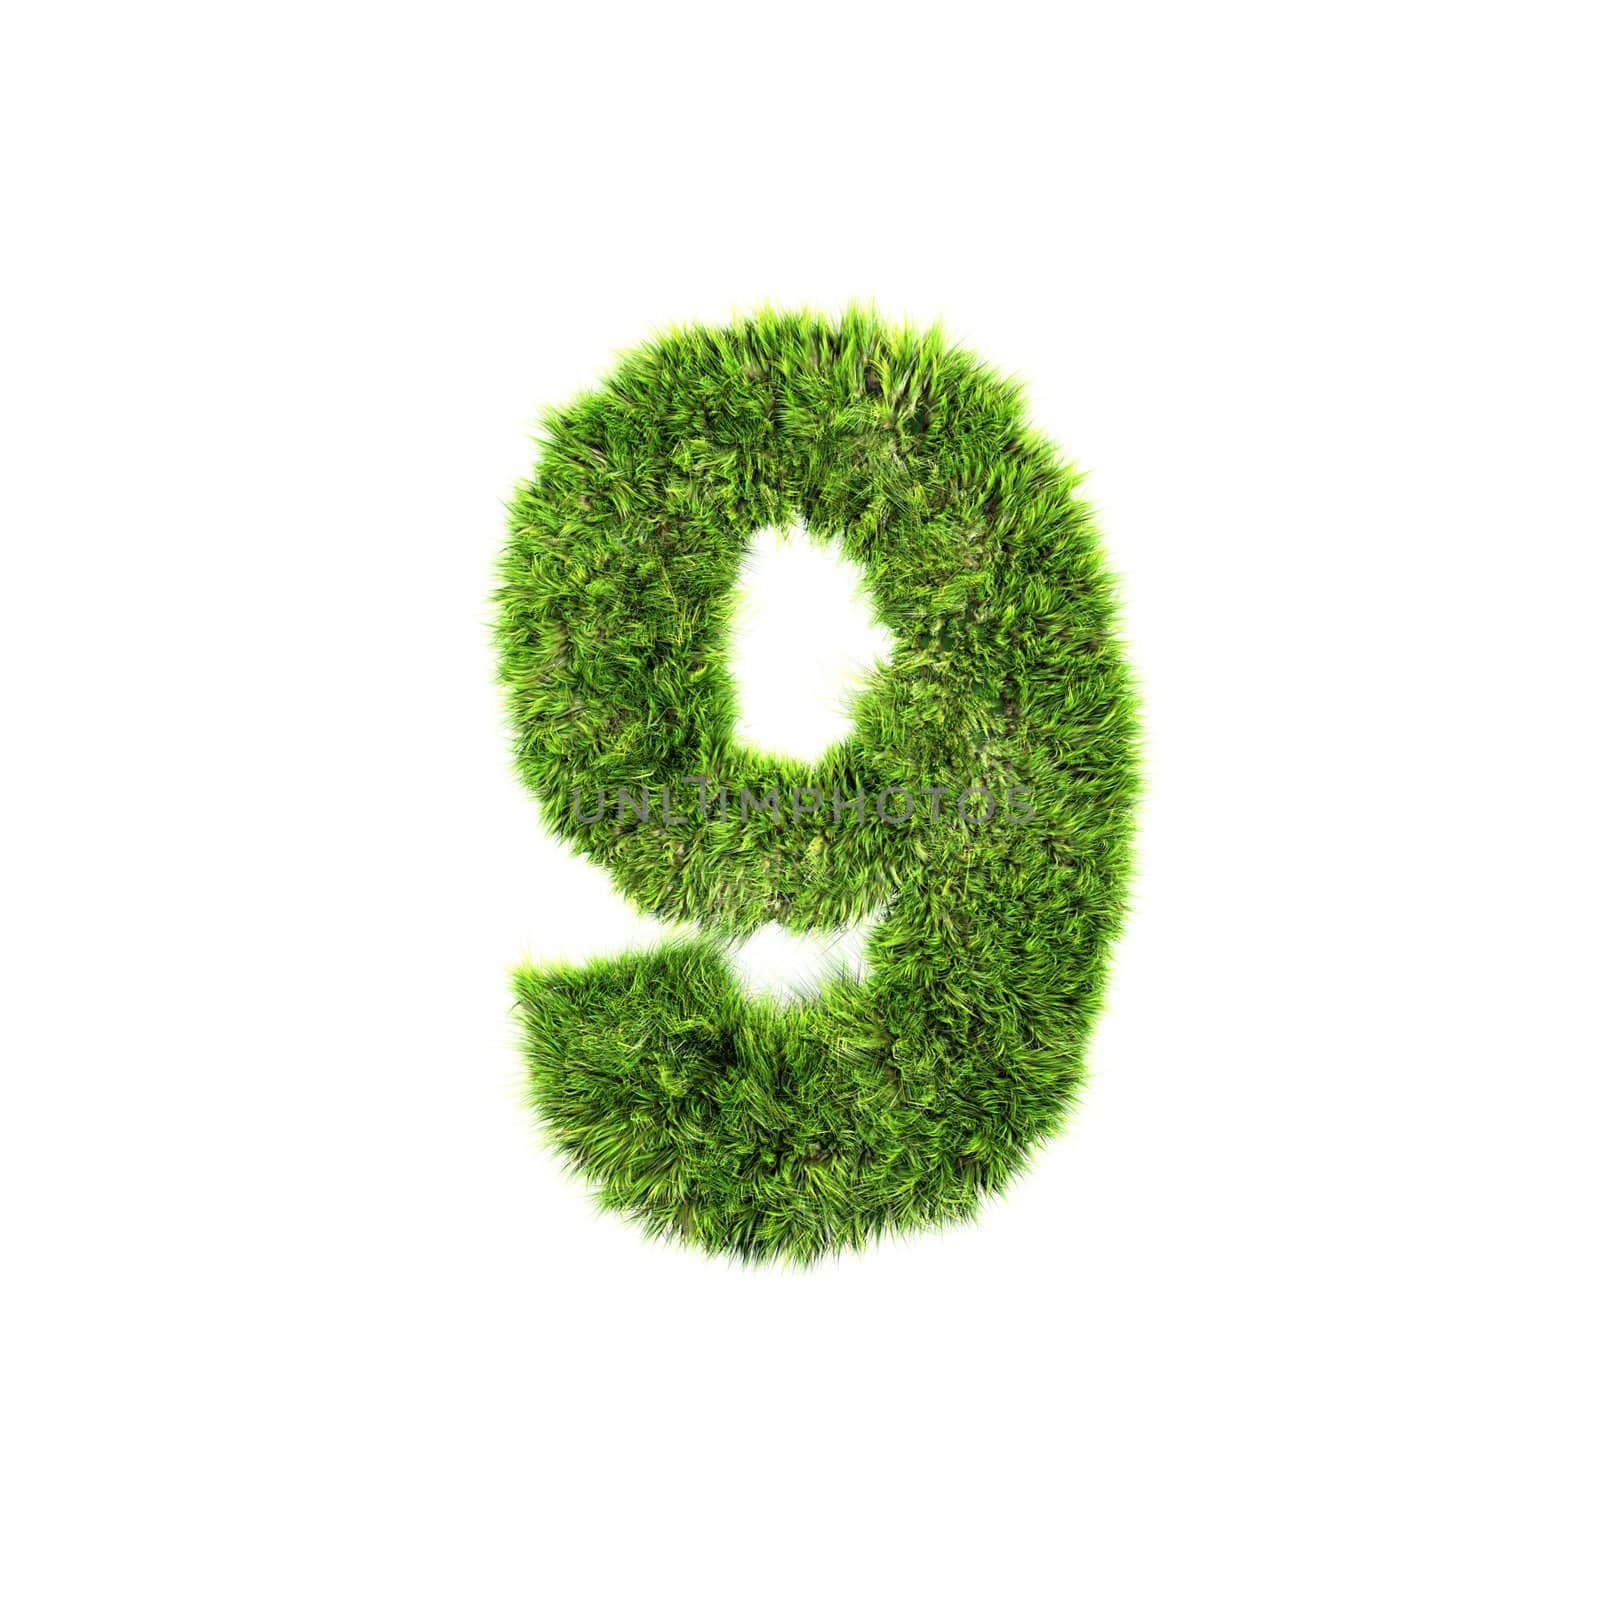 3d grass digit isolated on a white background - 9 by chrisroll